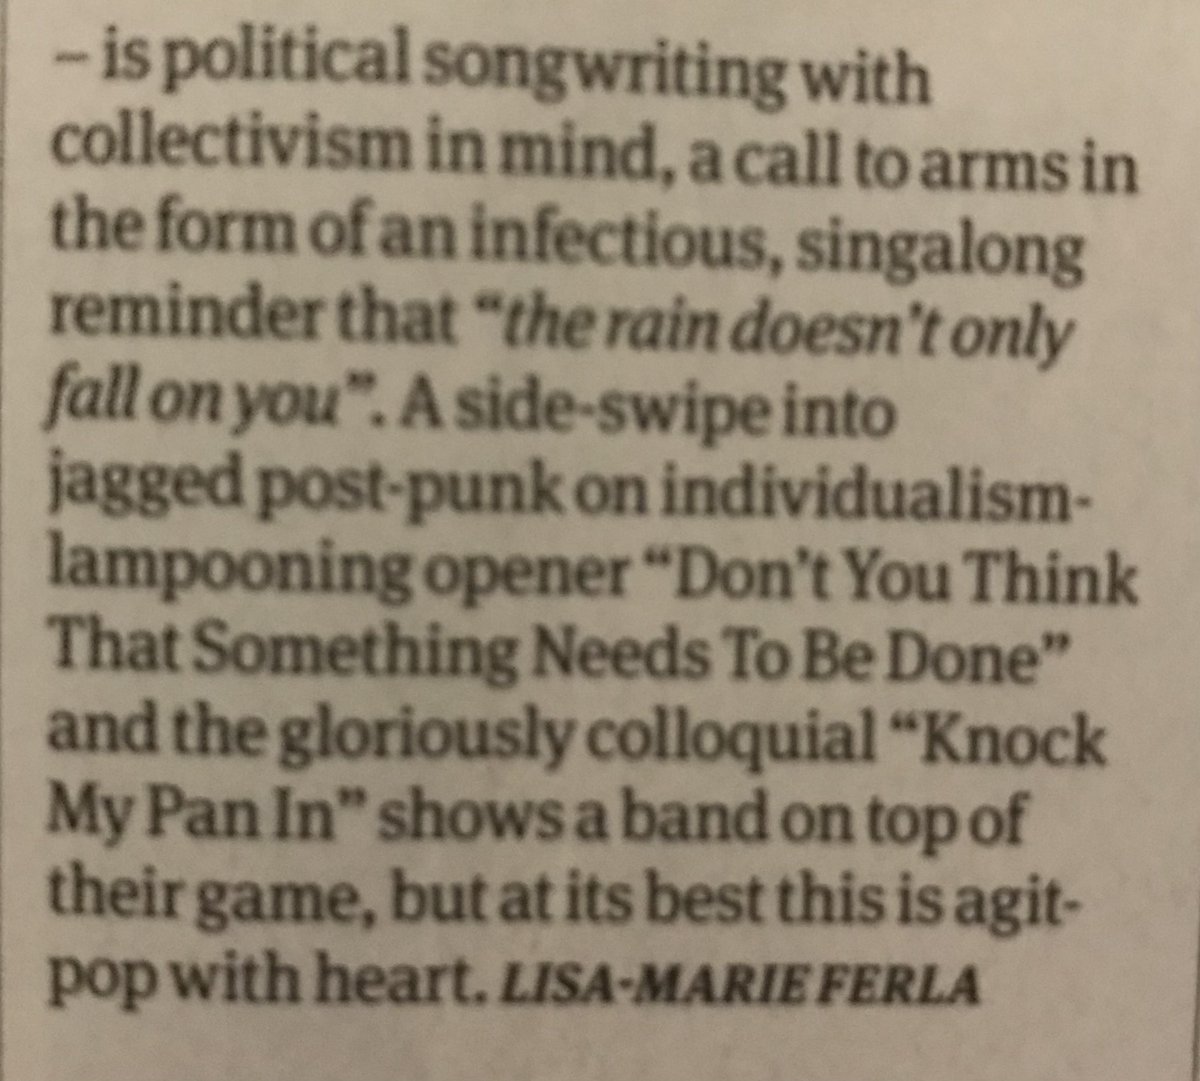 'Agit-pop with heart' - a great wee review of the new Broken Chanter album in this month's @uncutmagazine. LP out next month on @ChemUnderground. @BrokenChanter